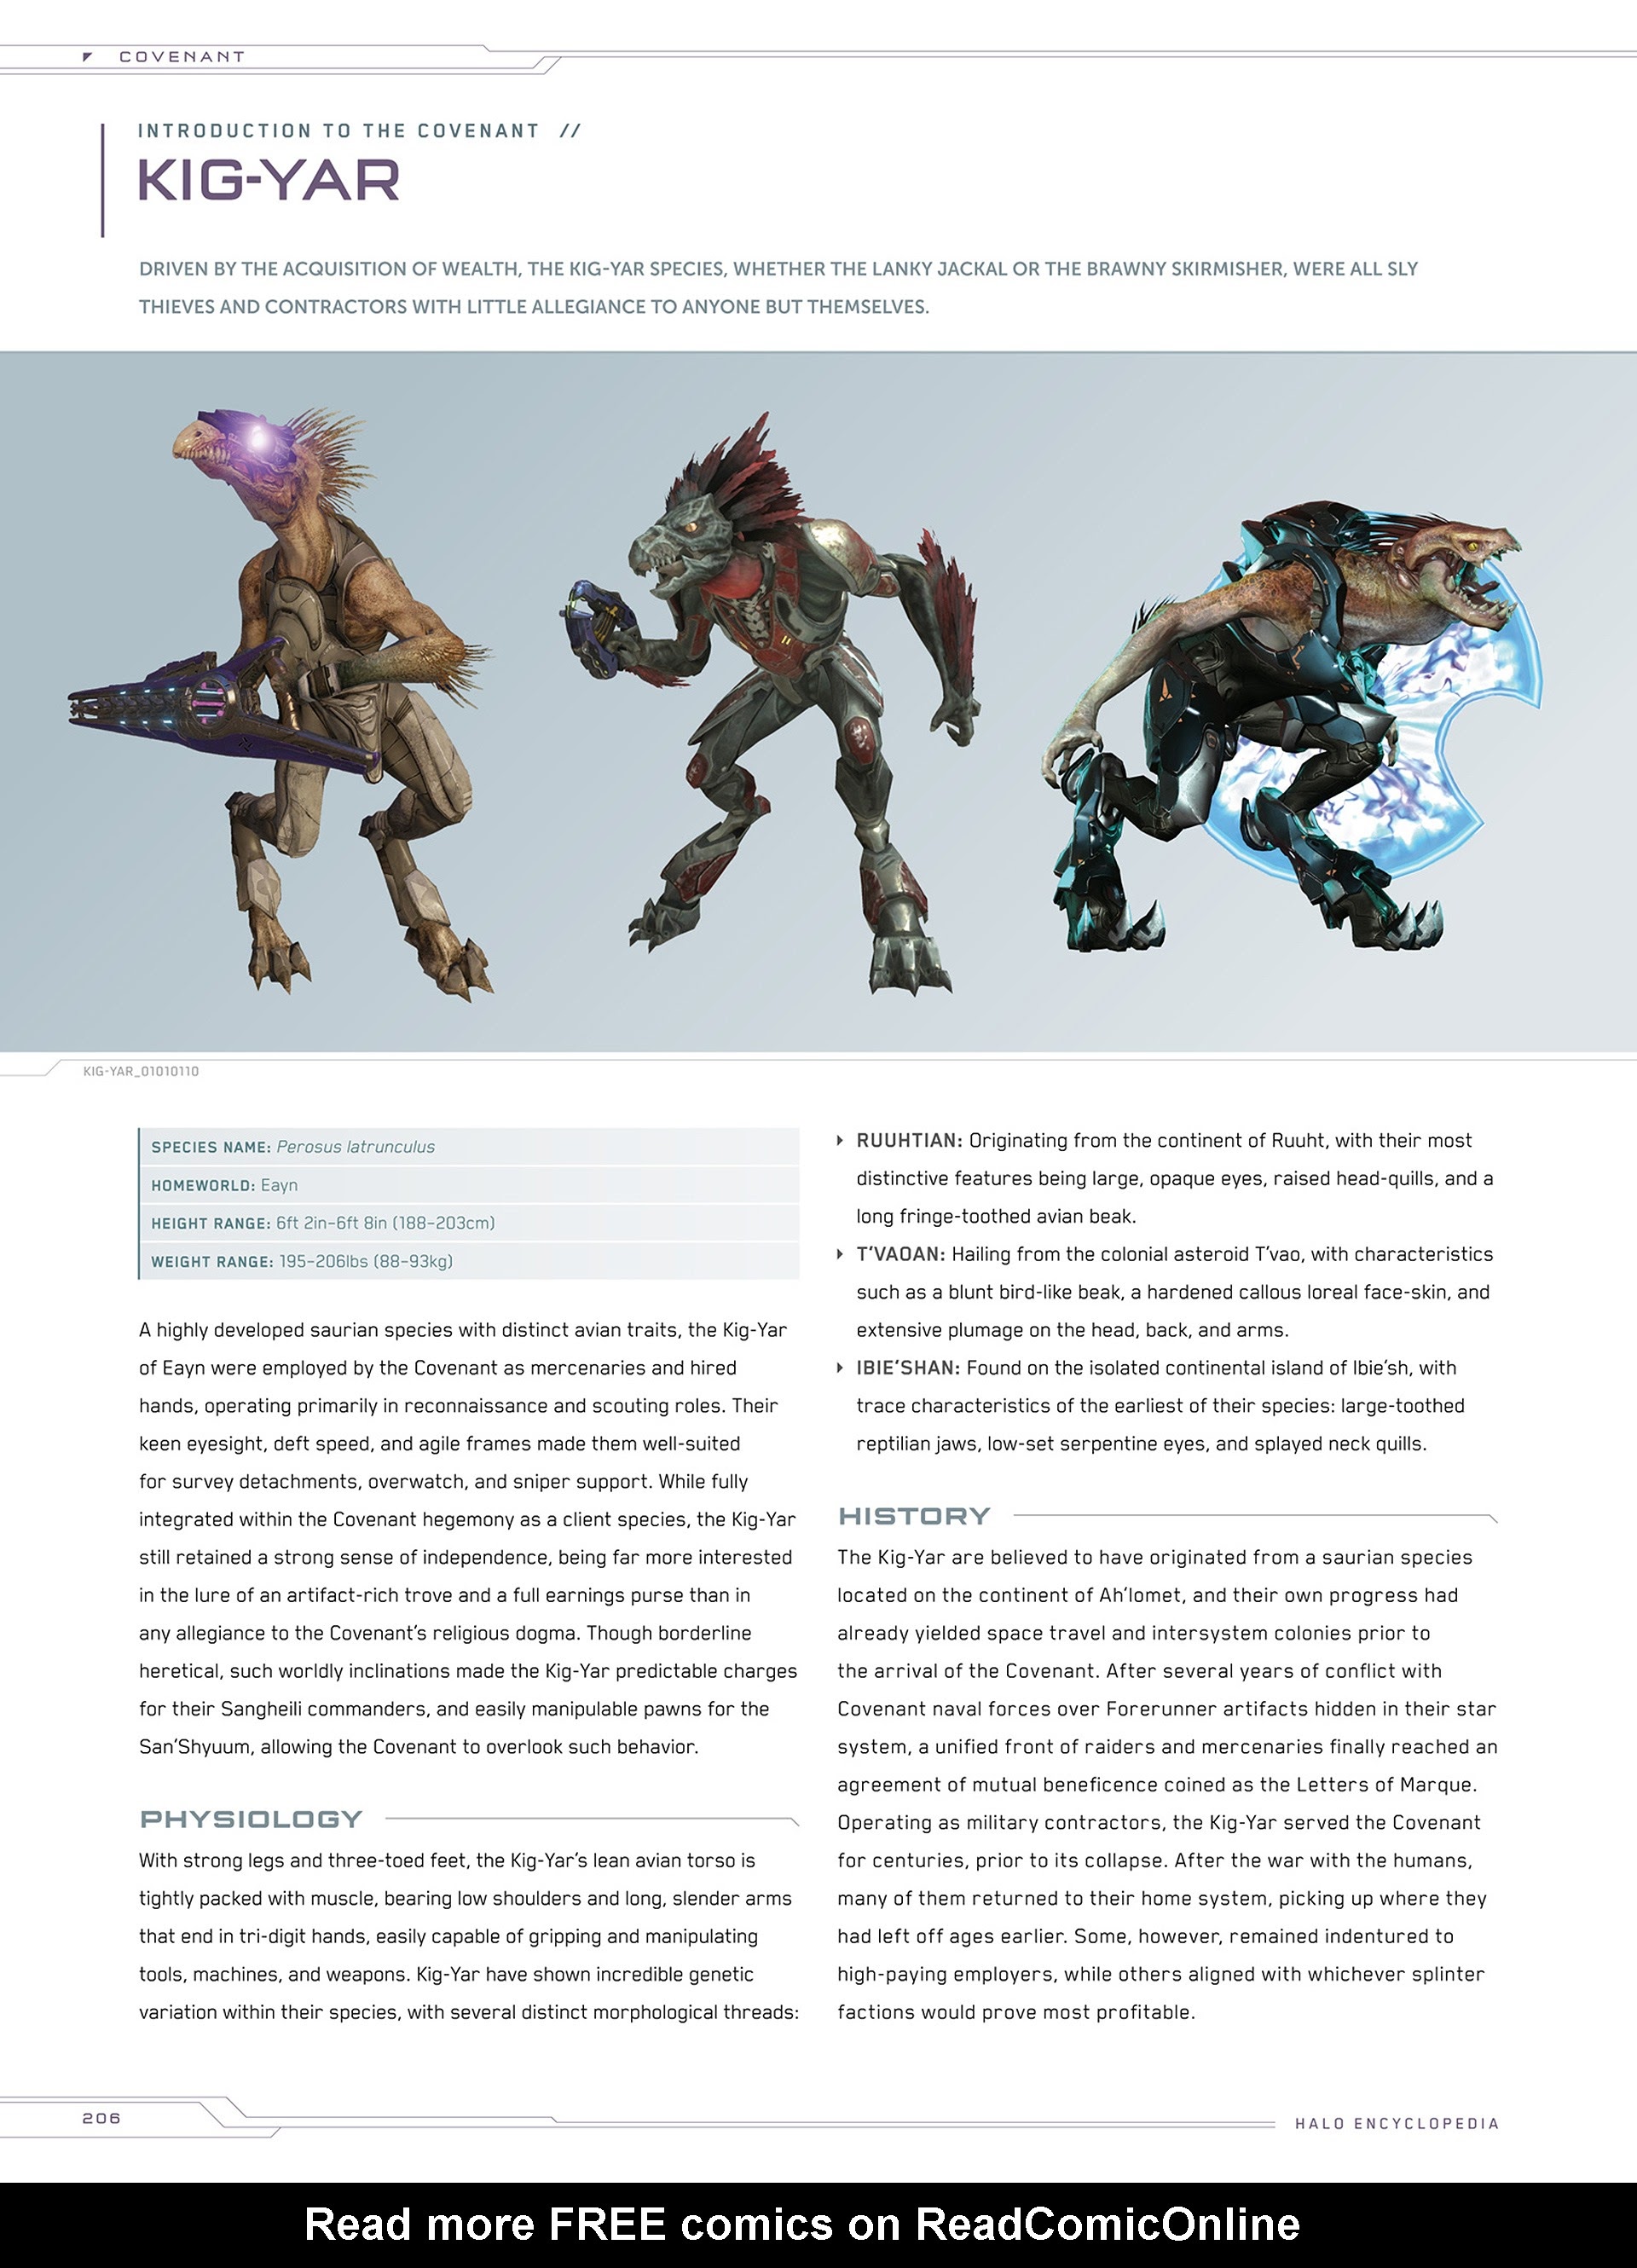 Read online Halo Encyclopedia comic -  Issue # TPB (Part 3) - 2